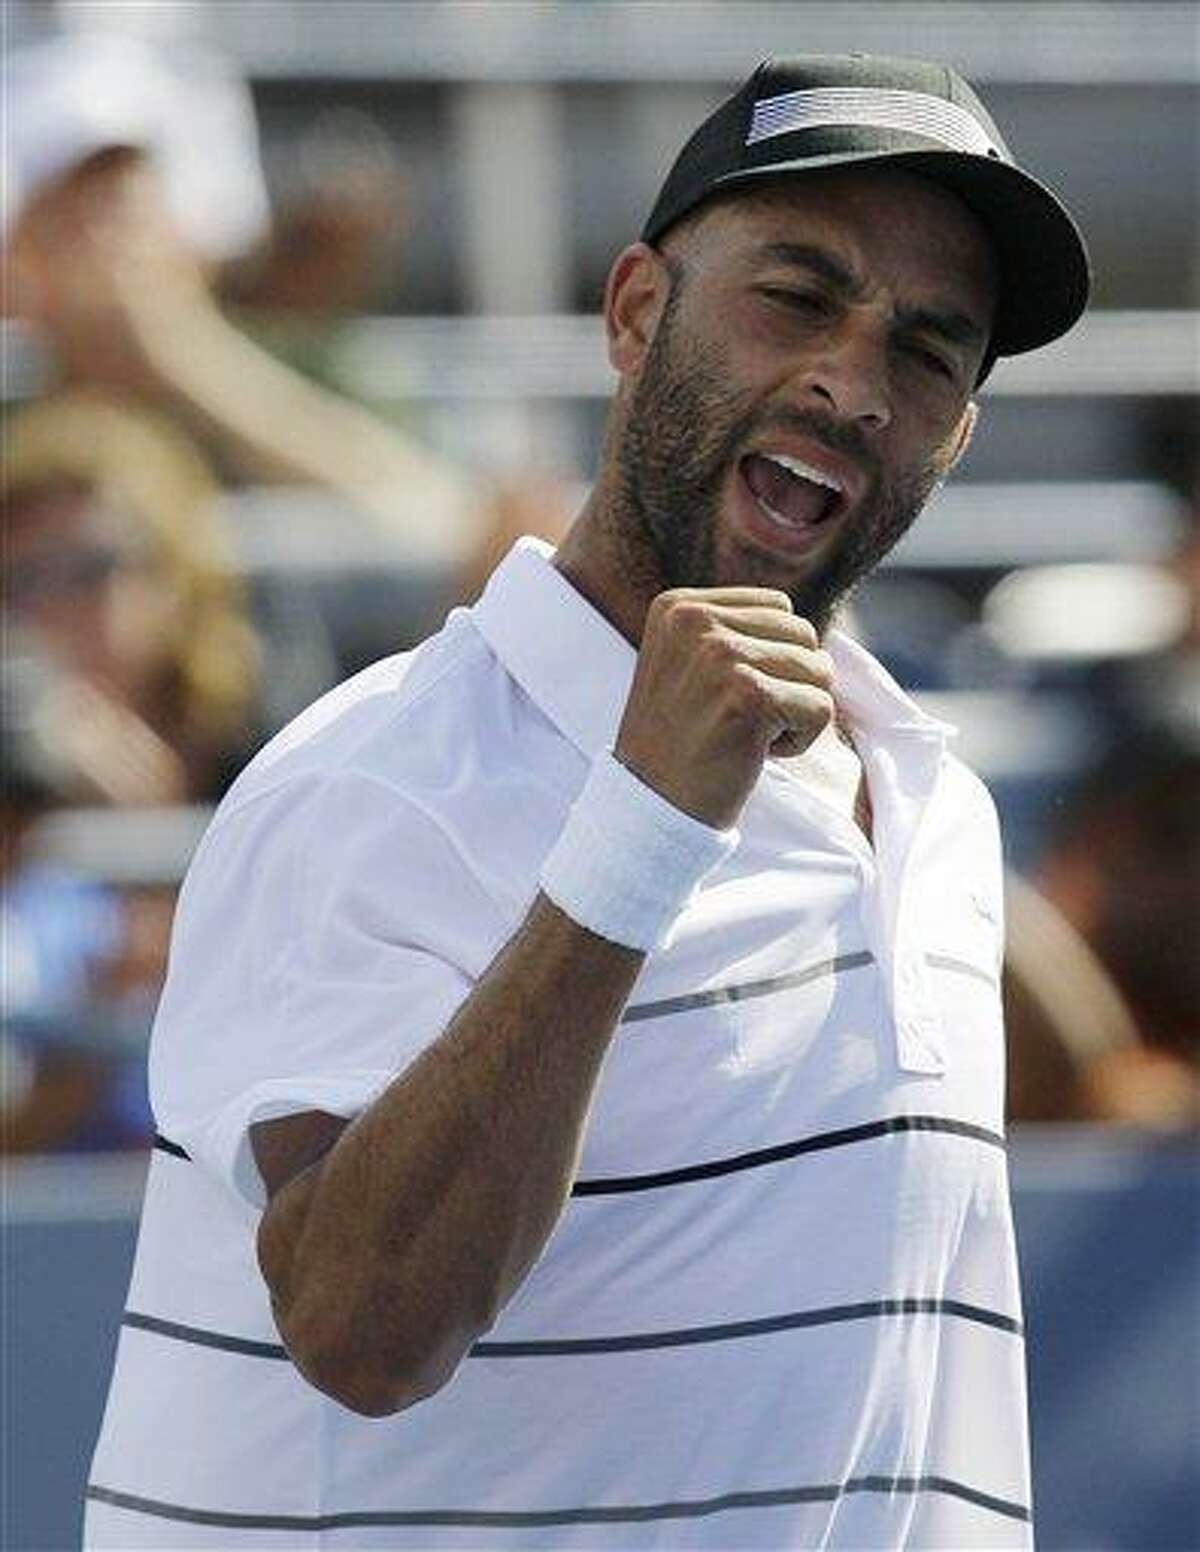 James Blake reacts after winning his match against Lukas Lacko, of Slovakia, in the first round of play at the 2012 US Open Tennis tournament, Monday, Aug. 27, 2012, in New York. (AP Photo/Kathy Willens)